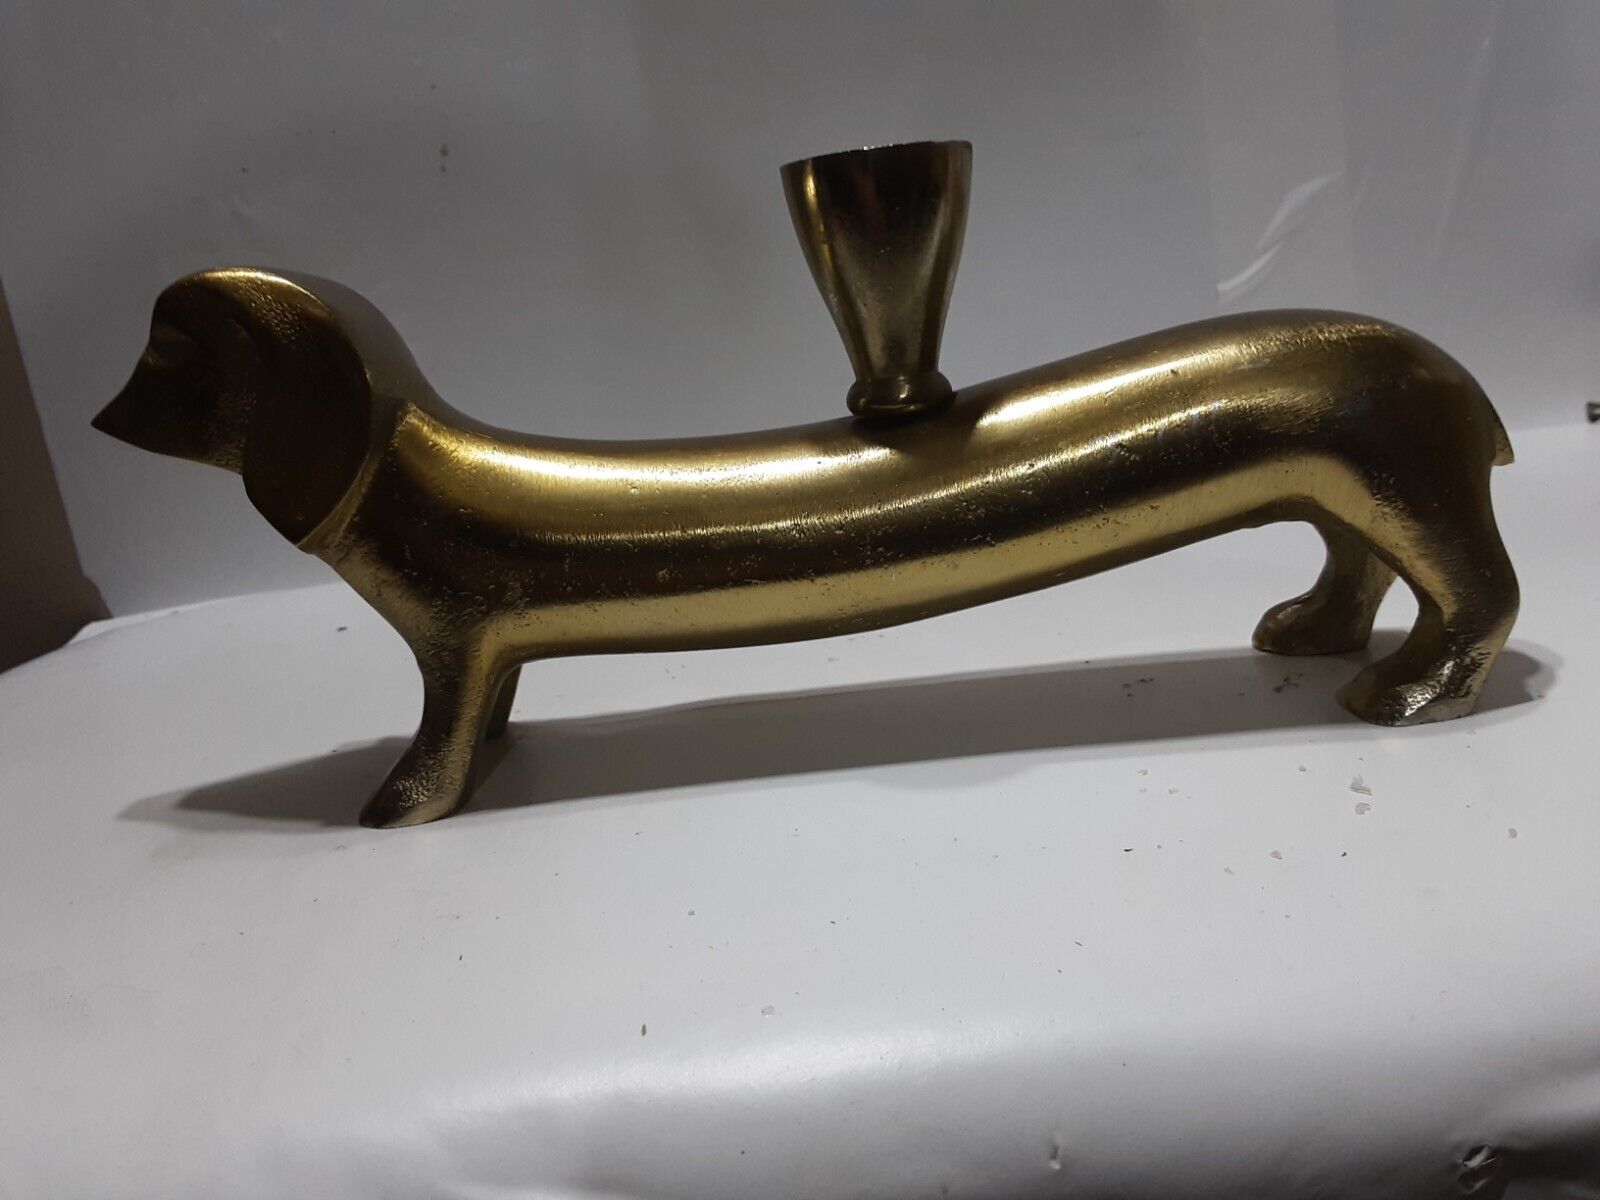 OUTSTANDING ABSTRACT MODERNIST METAL DACHSHUND FIGURINE,SCULPTURAL CANDLE HOLDER